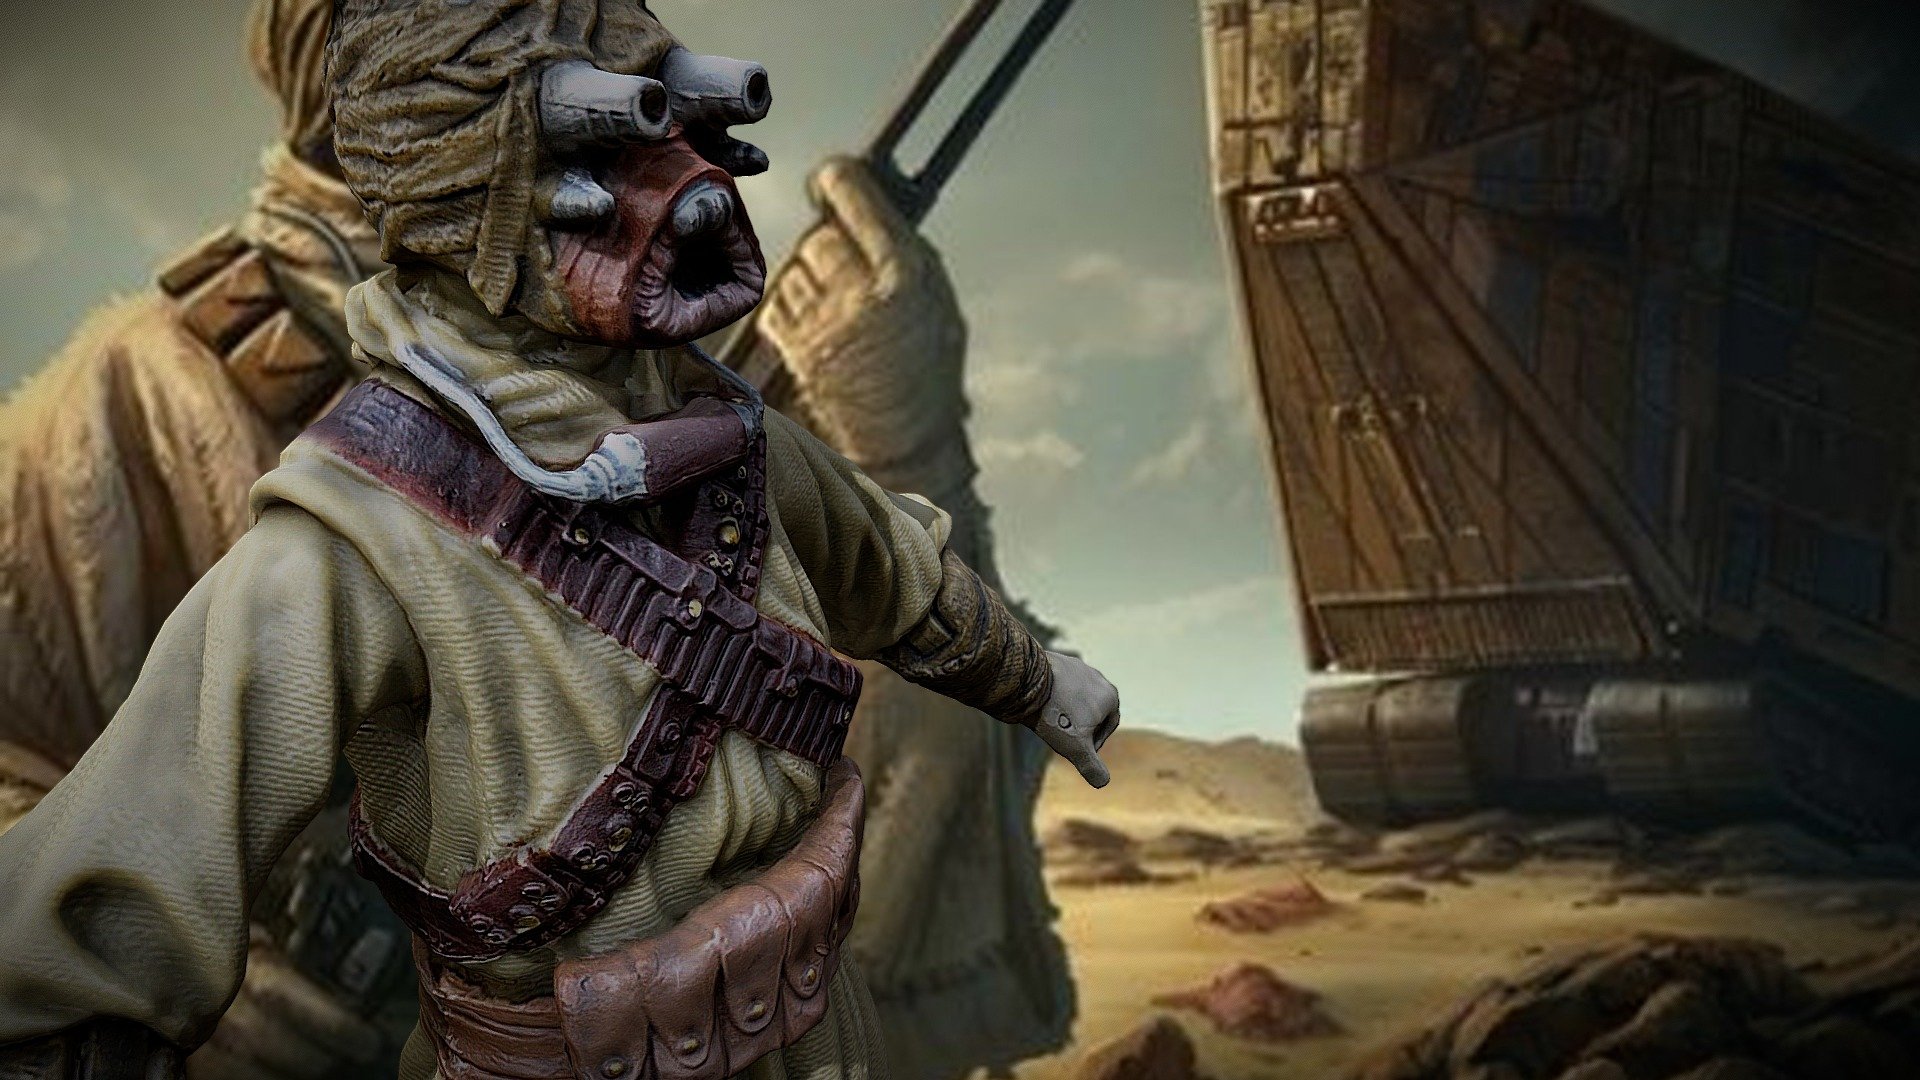 Unedited Star Wars Tusken Raider - Iphone -Scaniverse. If you download please give a like. Thank you 3d model